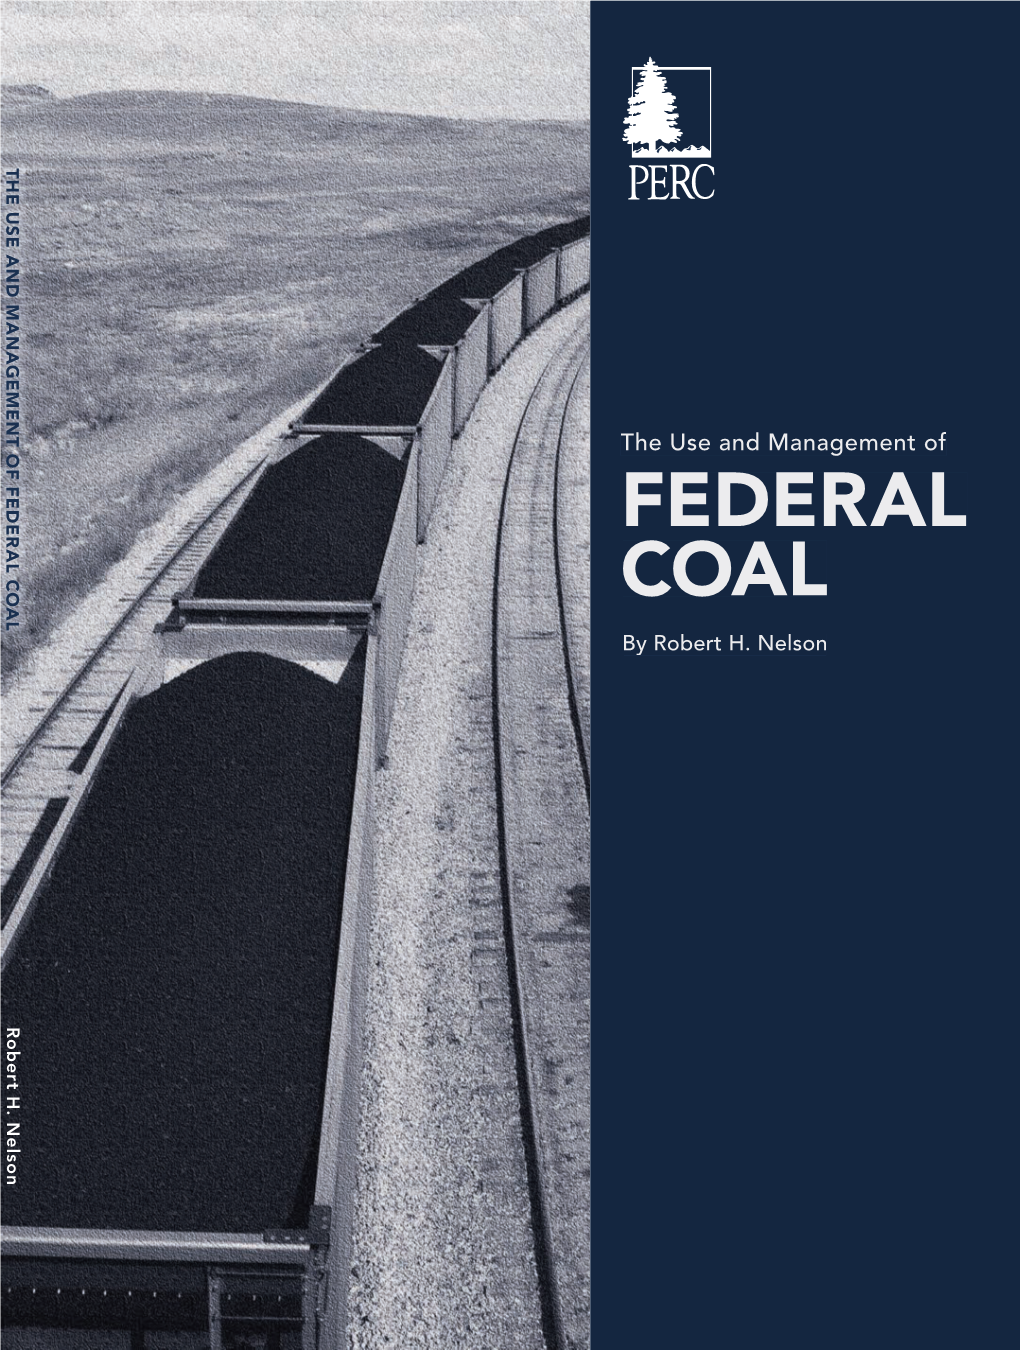 The Use and Management of FEDERAL COAL by Robert H